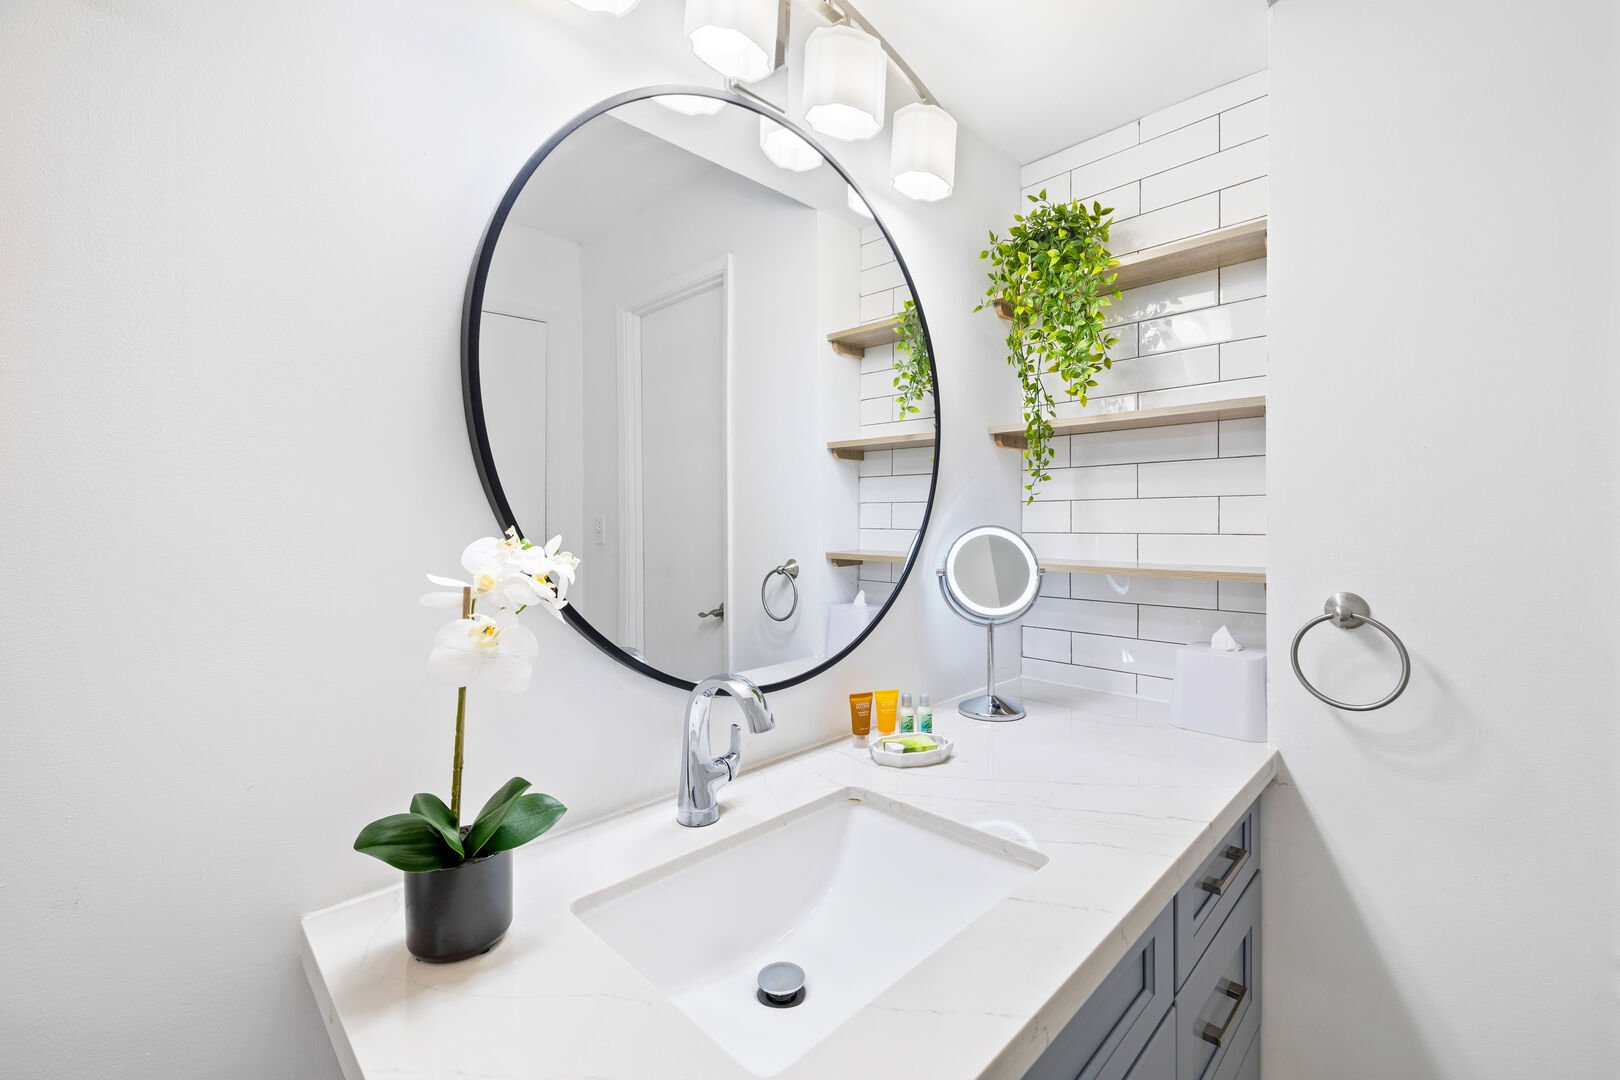 Well-lit bathroom with storage shelves